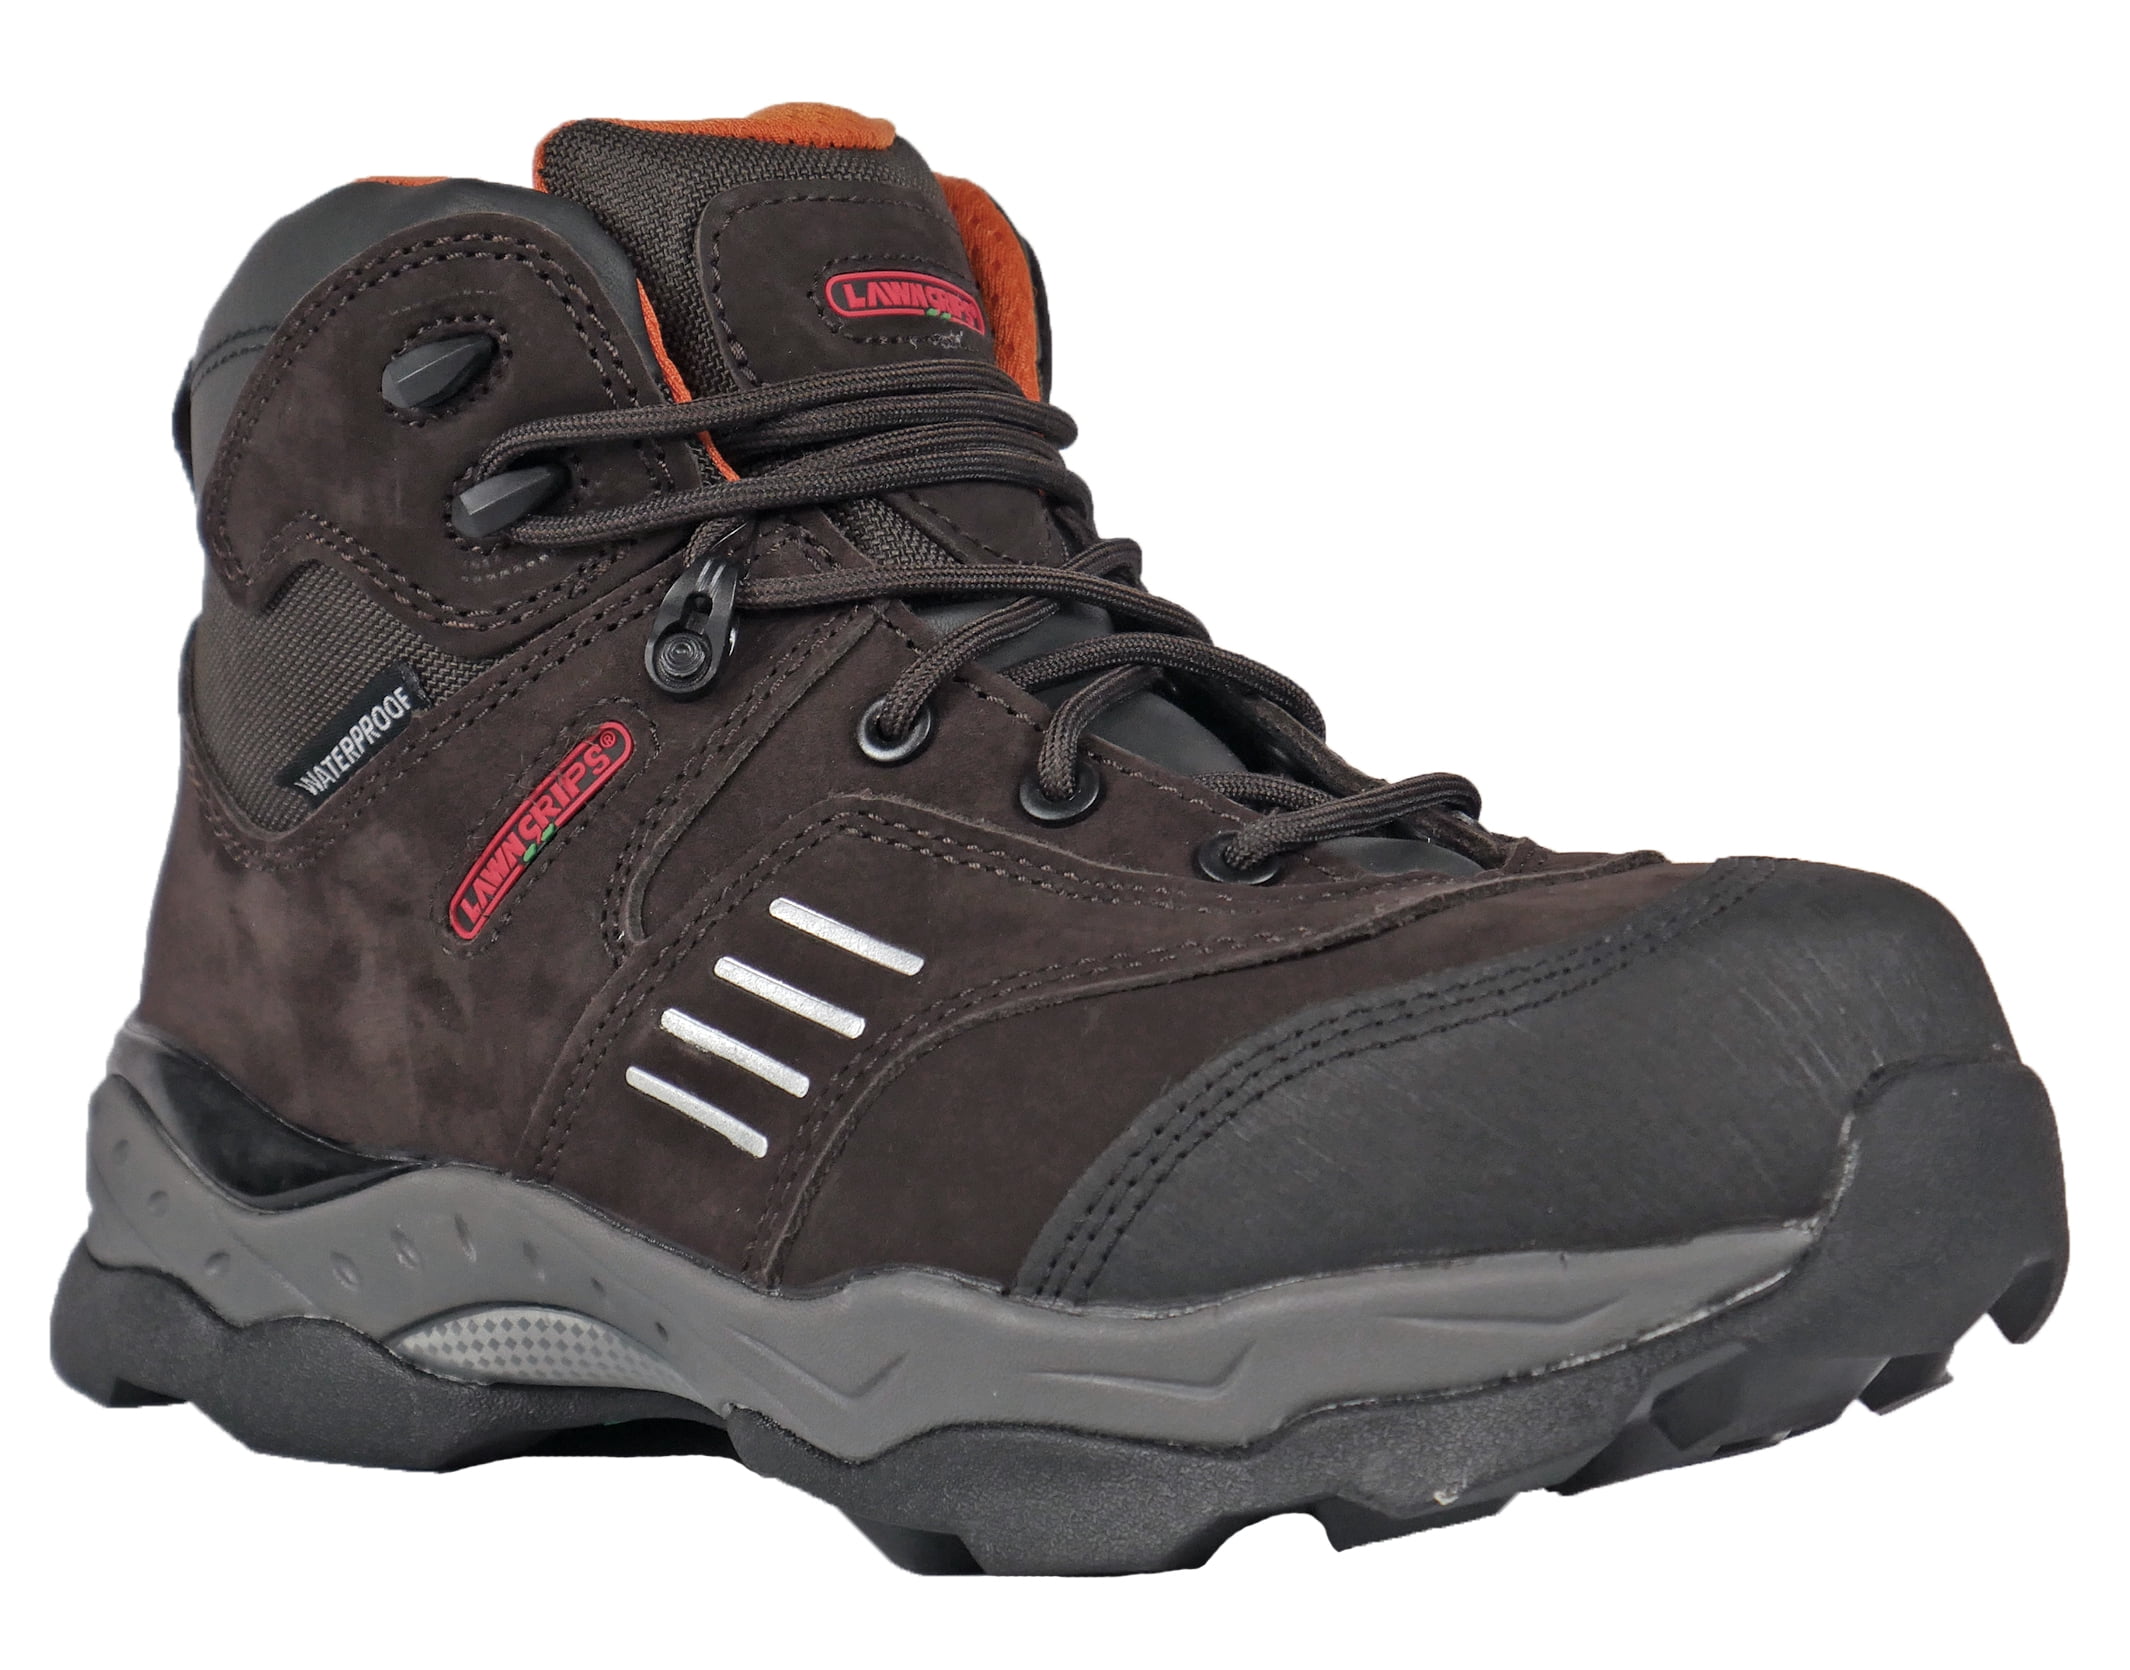 Safety Shoes Mens Work Boots Composite Steel Toe Hiking Lightweight Breathable 